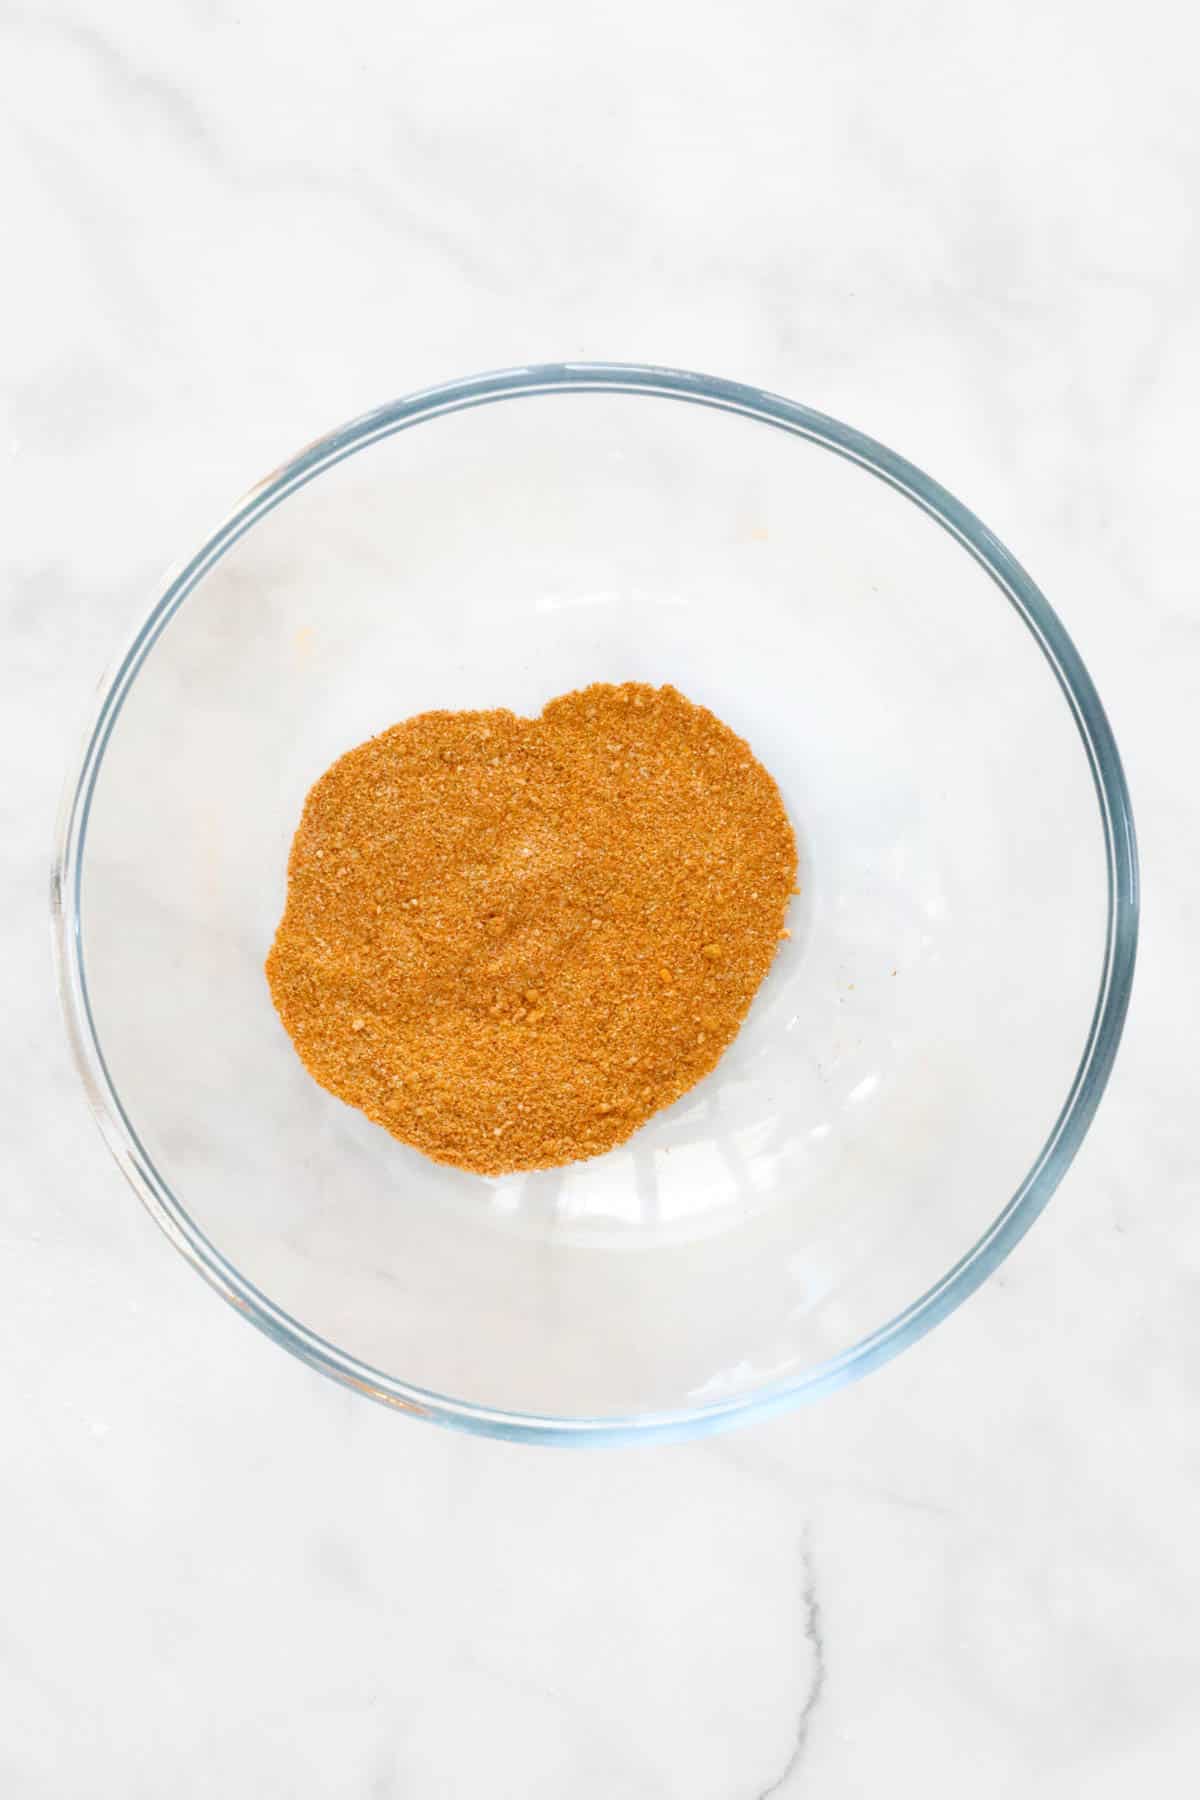 The satay spices mixed together in a mixing bowl.